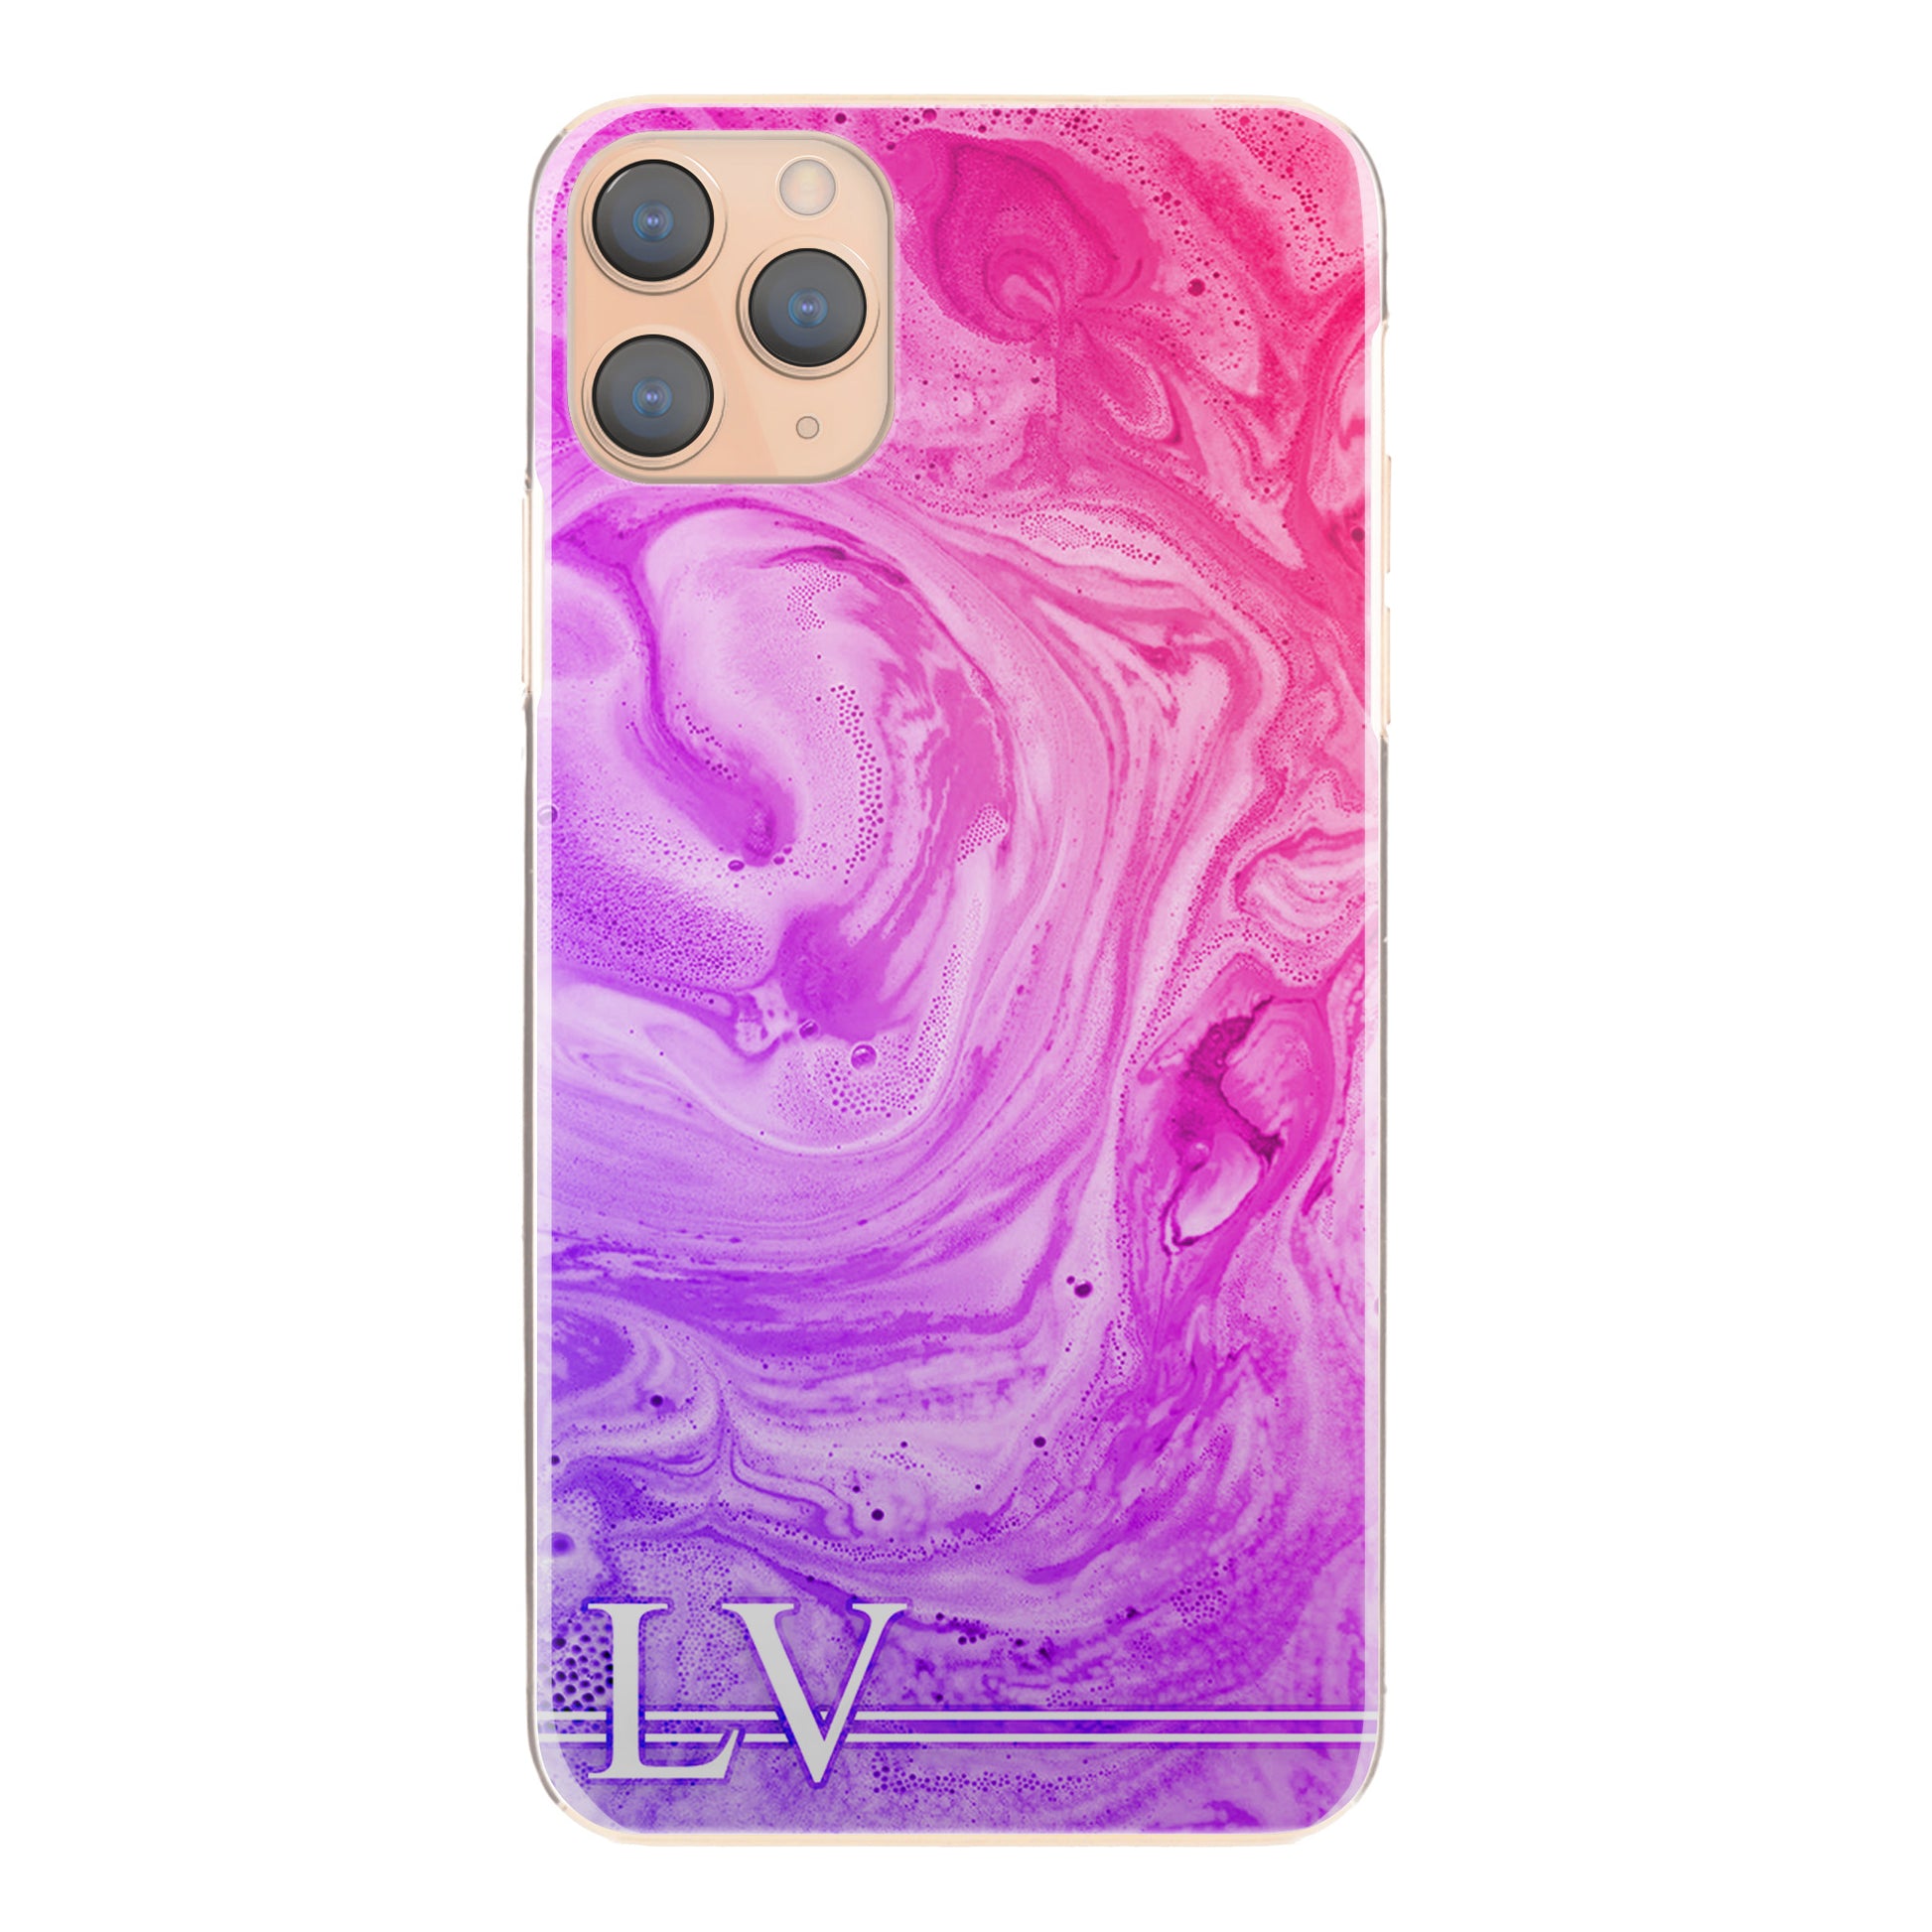 Personalised Google Phone Hard Case with White Initials on Purple Pink Gradient Swirled Marble